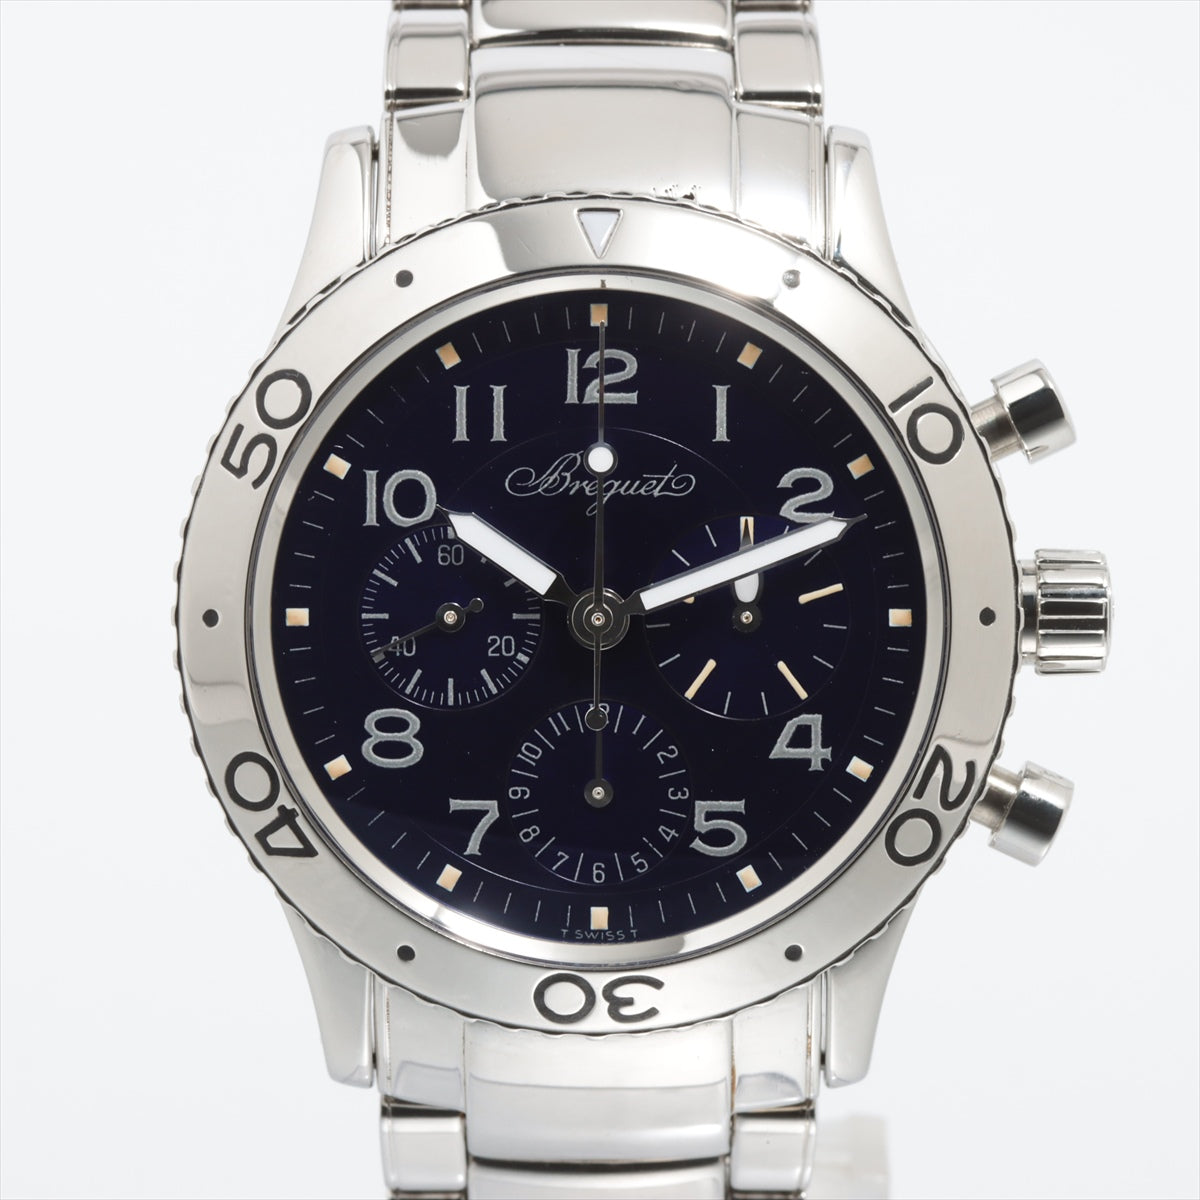 Breguet Aeronavale Limited to 1000 in Japan 3807ST/J2/SW9 SS AT Blue-Face Extra-Link3